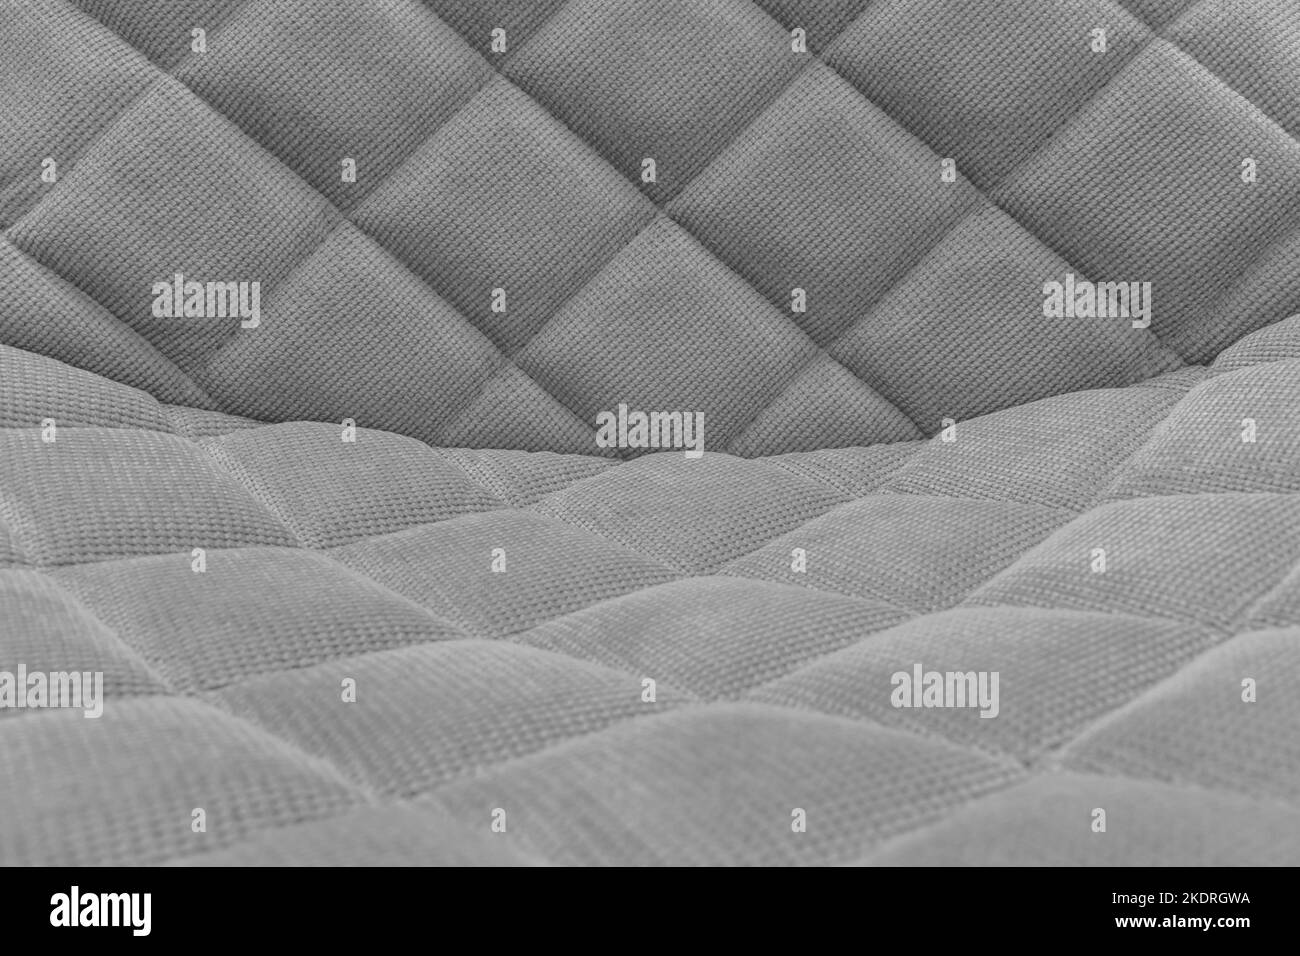 Fabric grey upholstery of interior chair design object decoration vintage background. Stock Photo